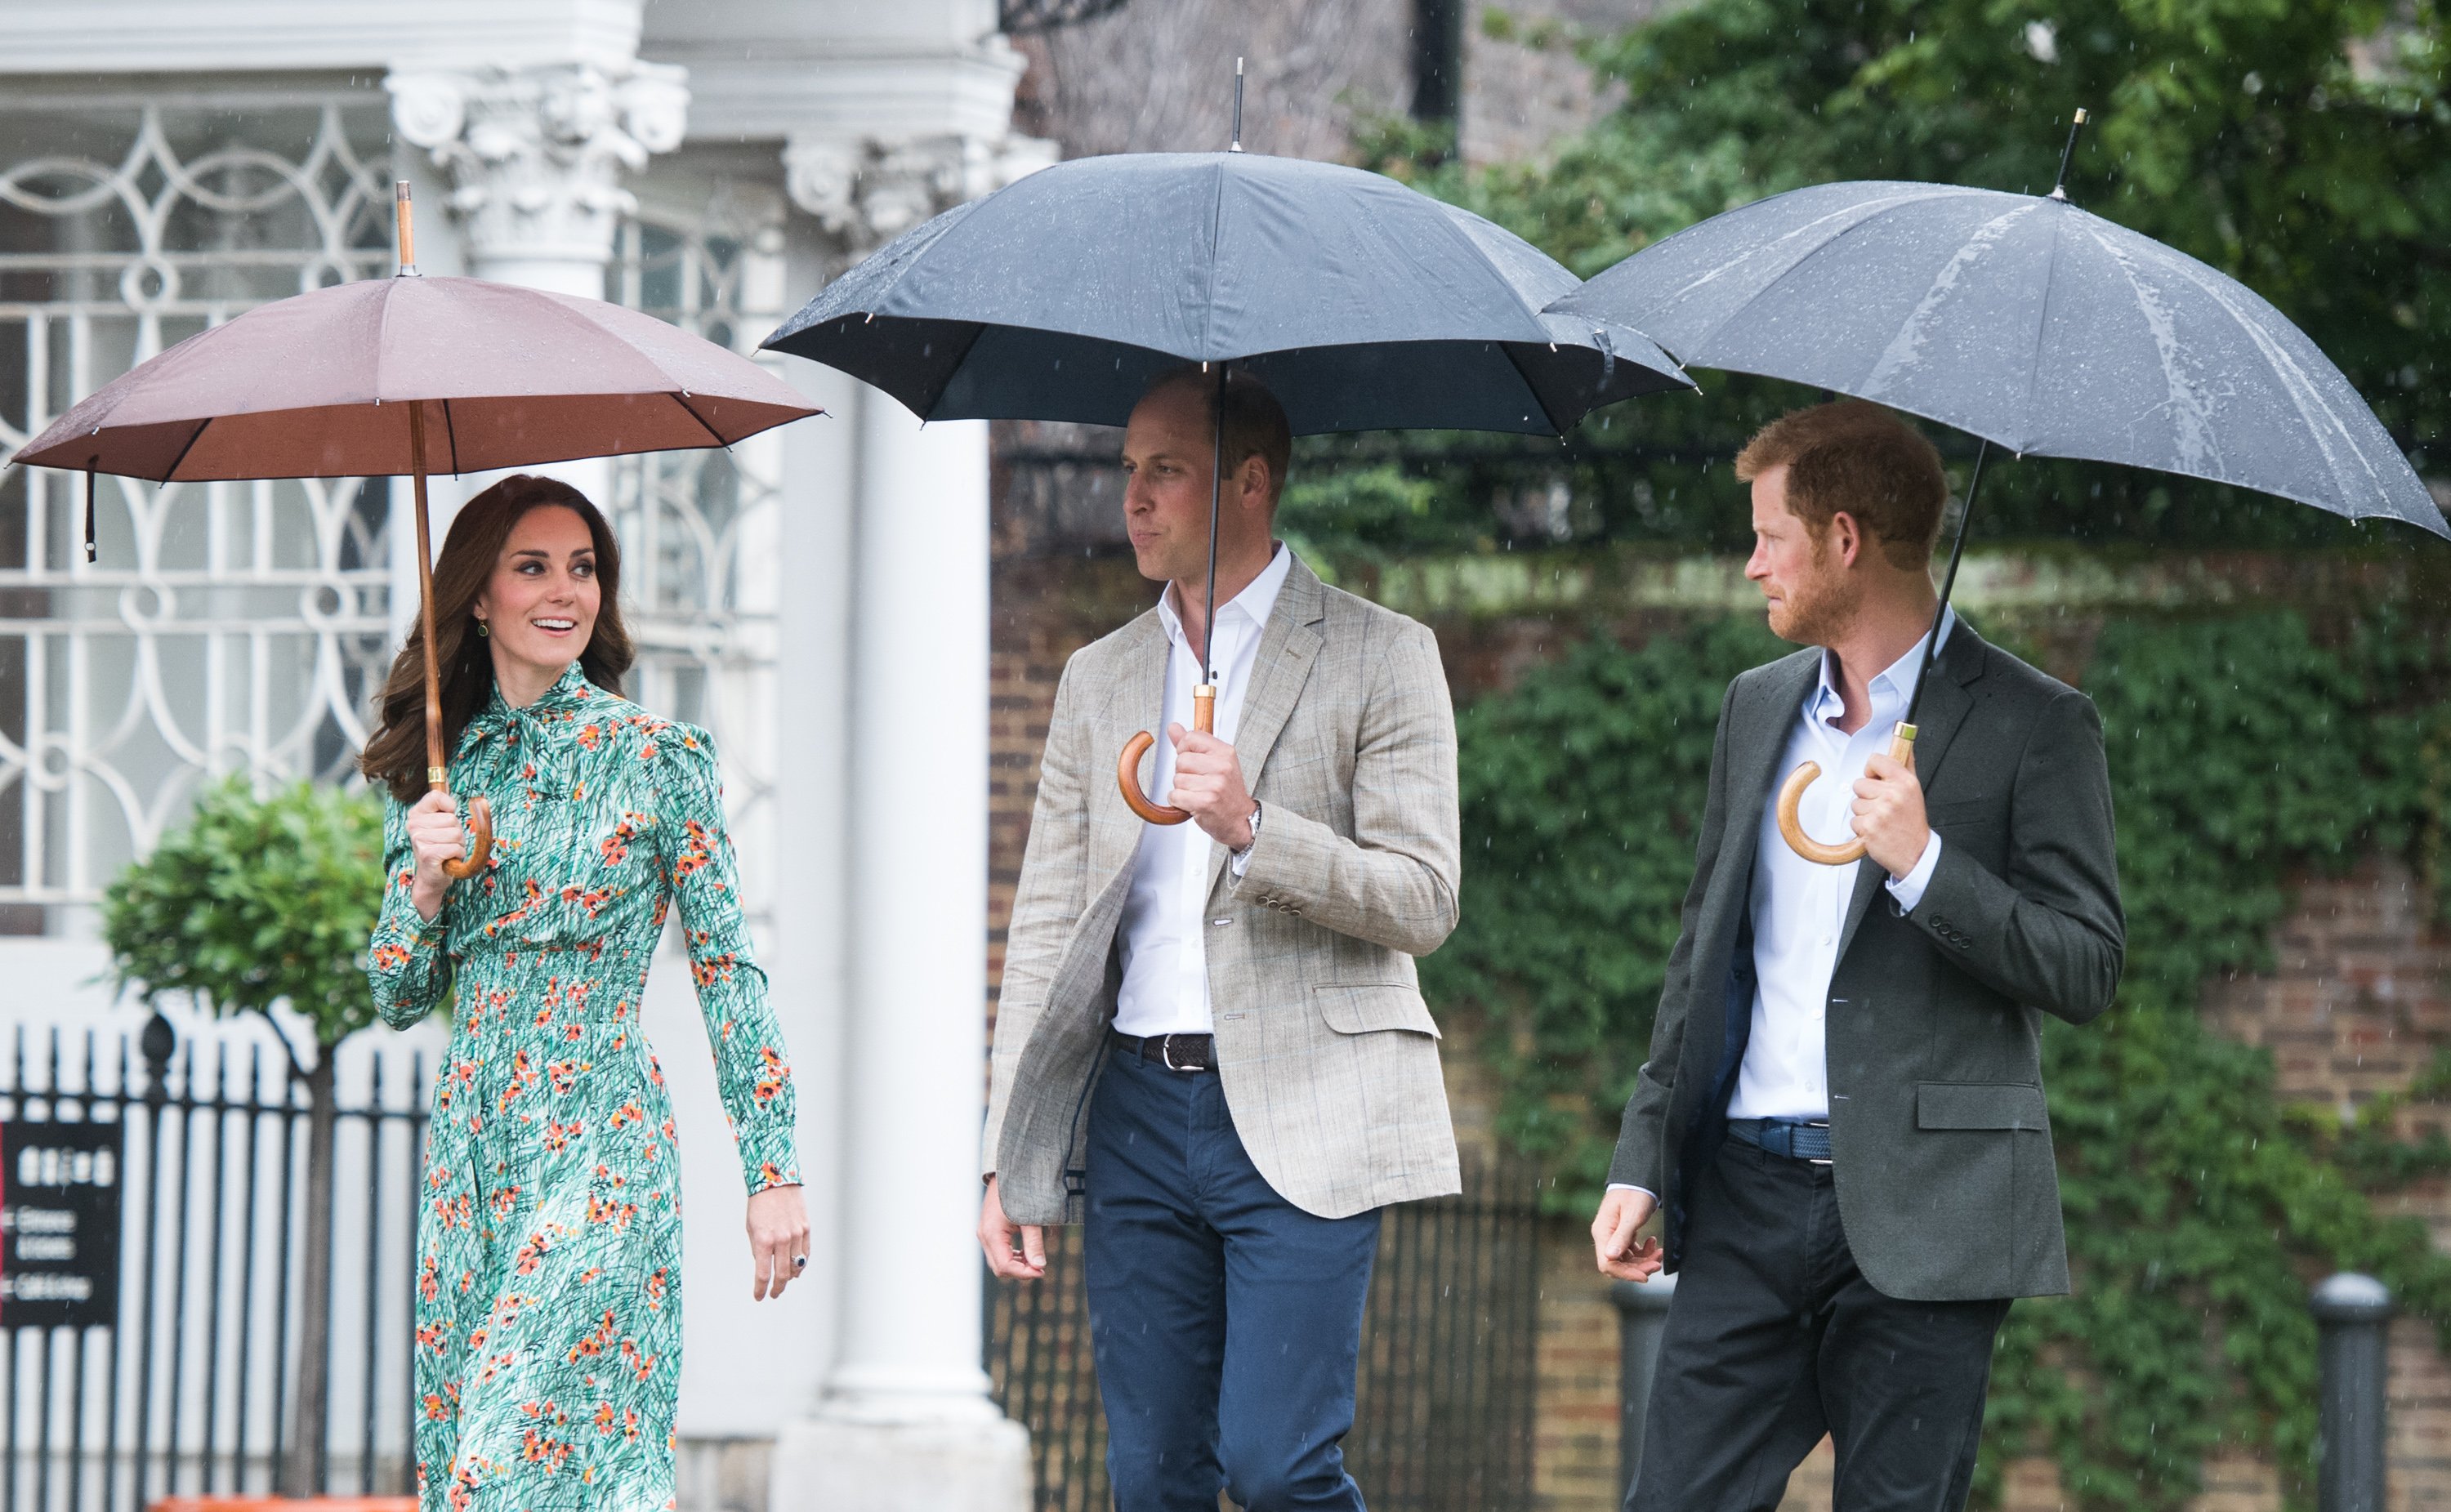 Kate Middleton, Prince William and Prince Harry during their visit to The Sunken Garden at Kensington Palace on August 30, 2017 in London, England. / Source: Getty Images